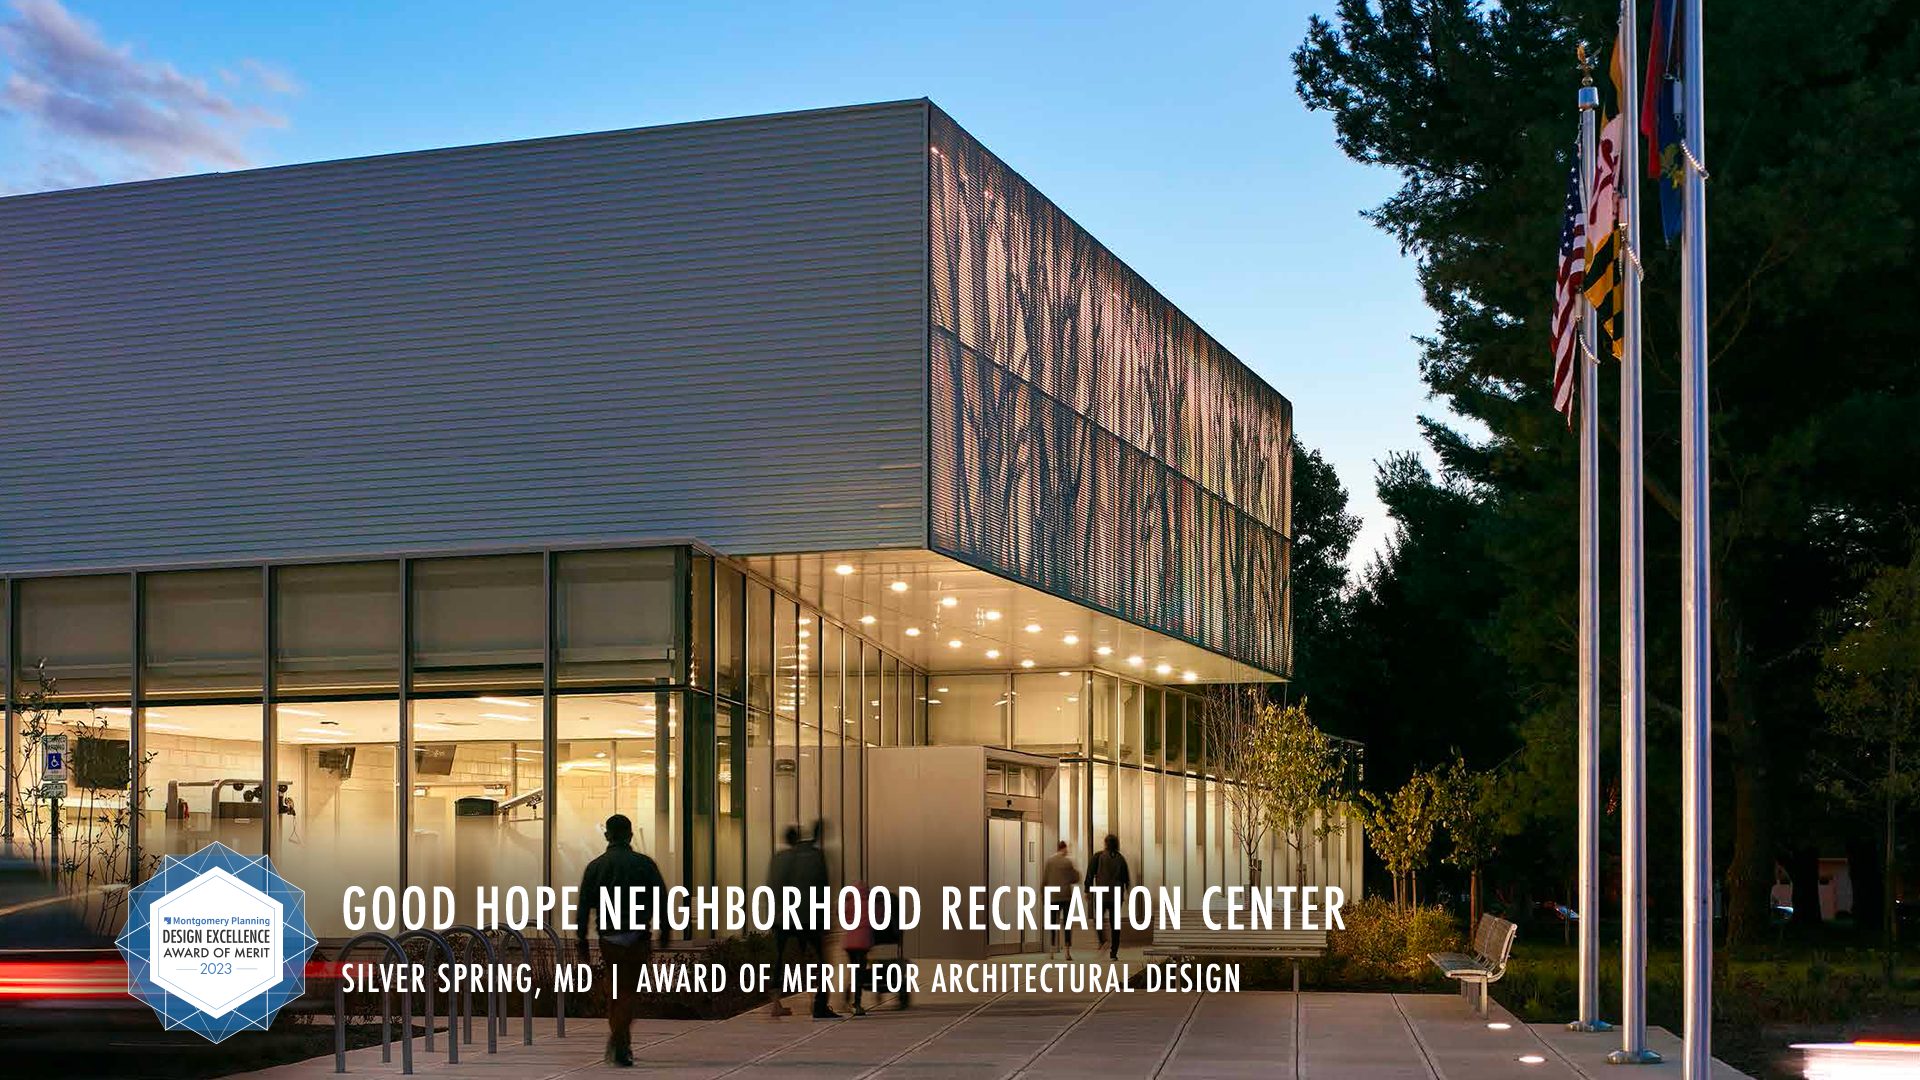 Good Hope Recreation Center. two story modern building with glass exterior on first story and flag poles outside